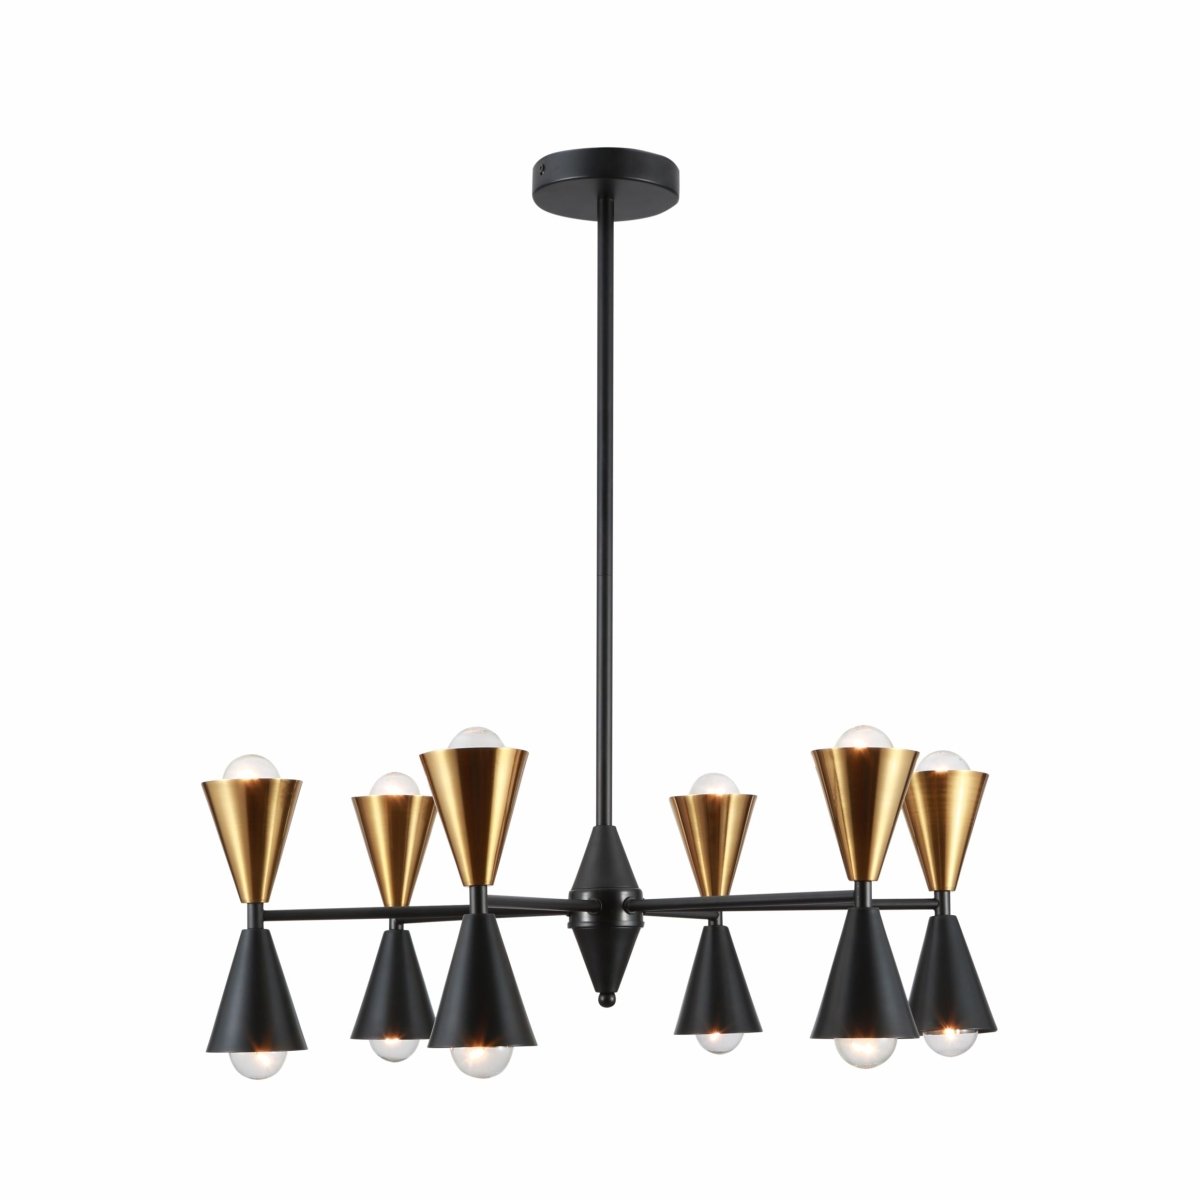 Main image of Black Gold Up Down Funnel Modern Chandelier with 12xE27 Fitting | TEKLED 150-18280